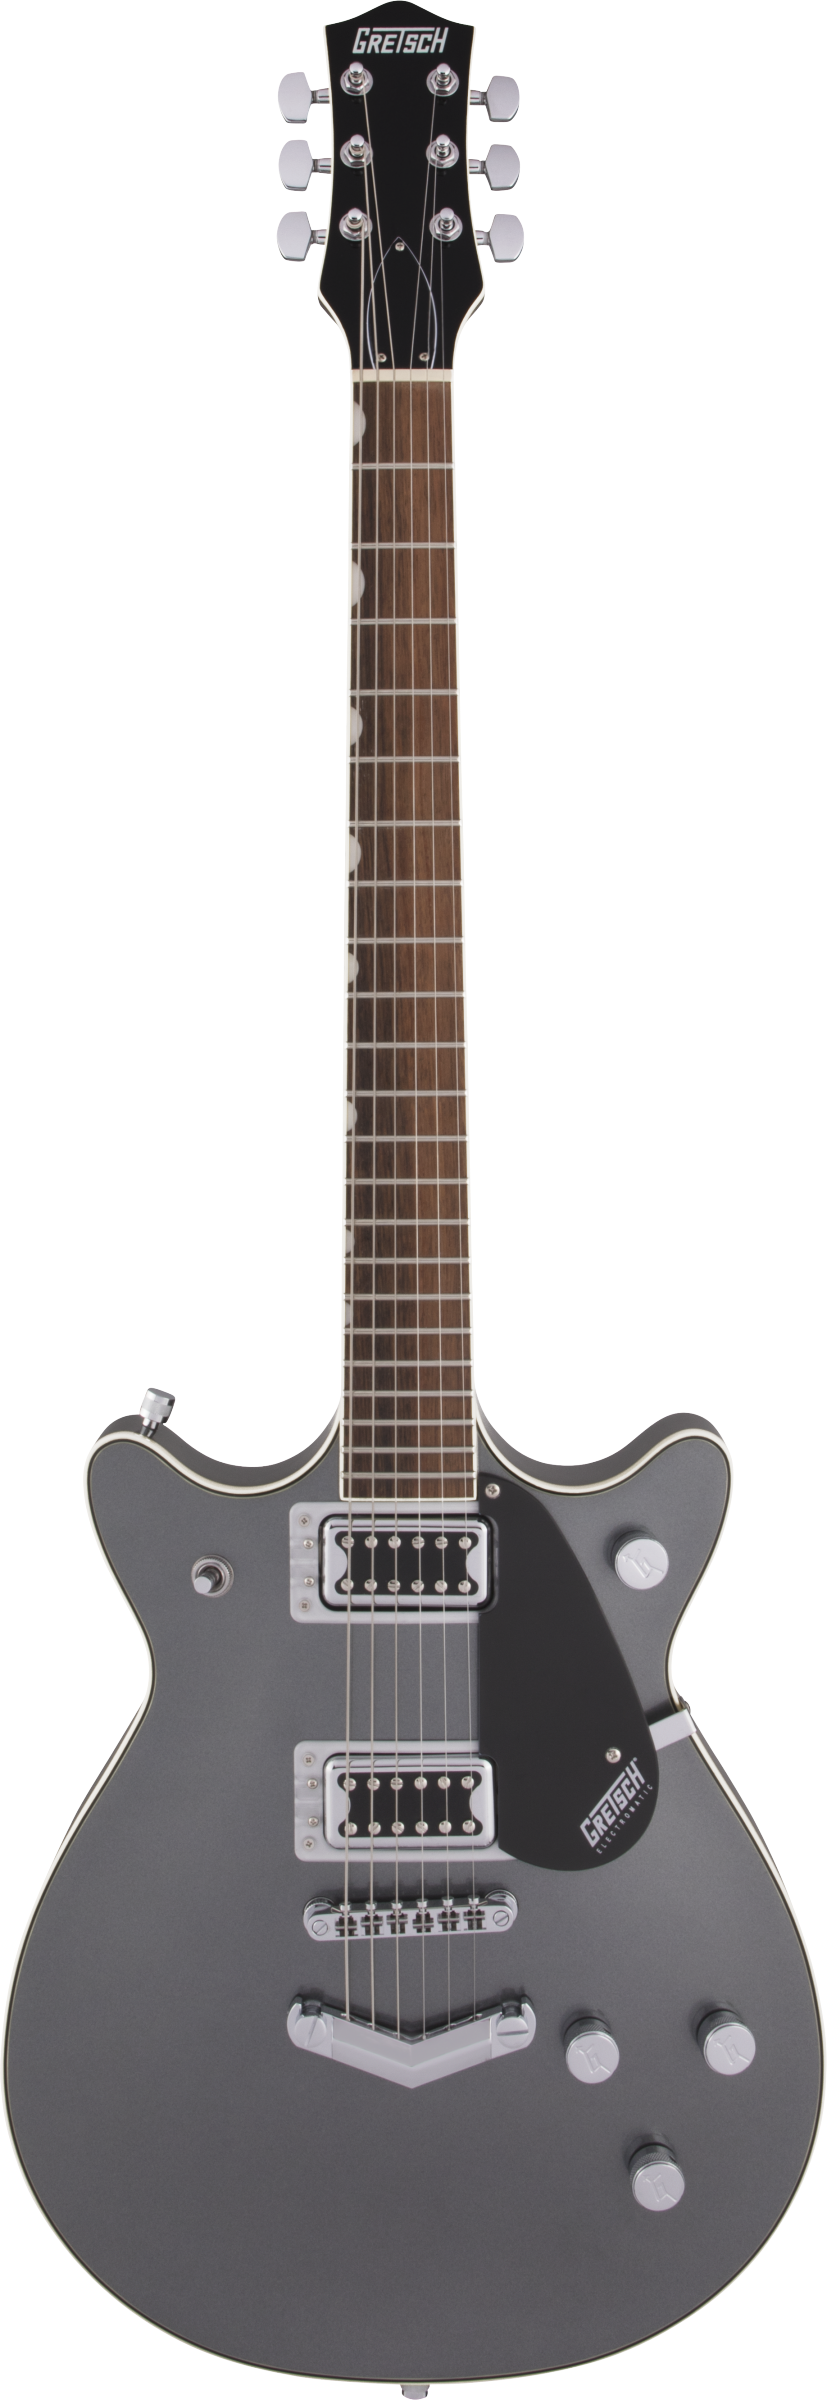 Gretsch G5222 Electromatic Double Jet Solidbody Electric Guitar - London Grey